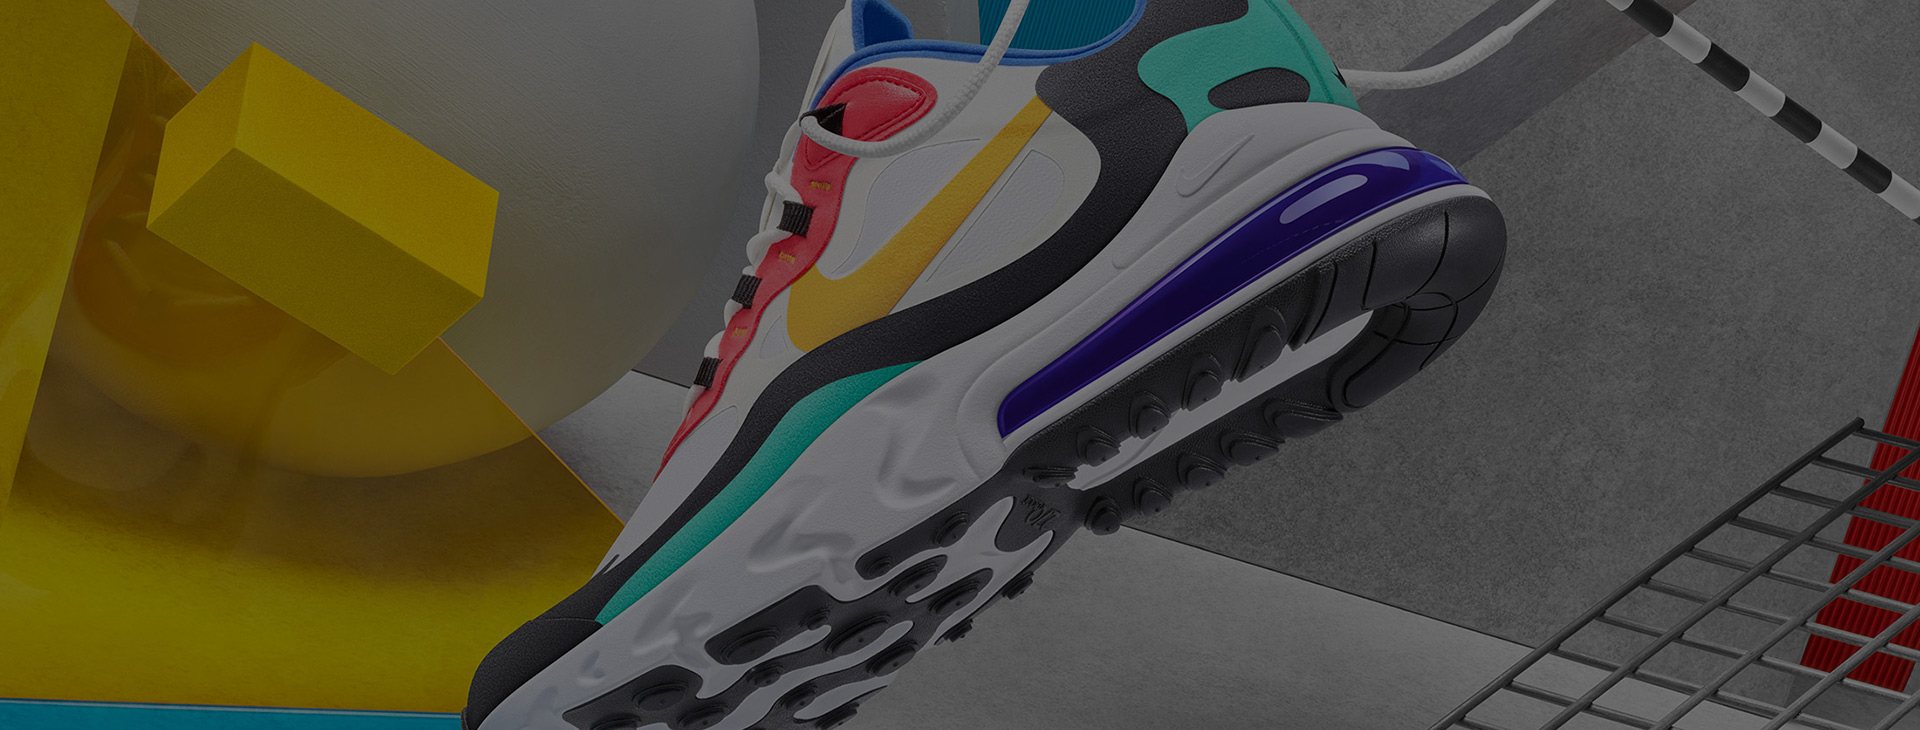 when did the nike air max 270 react come out